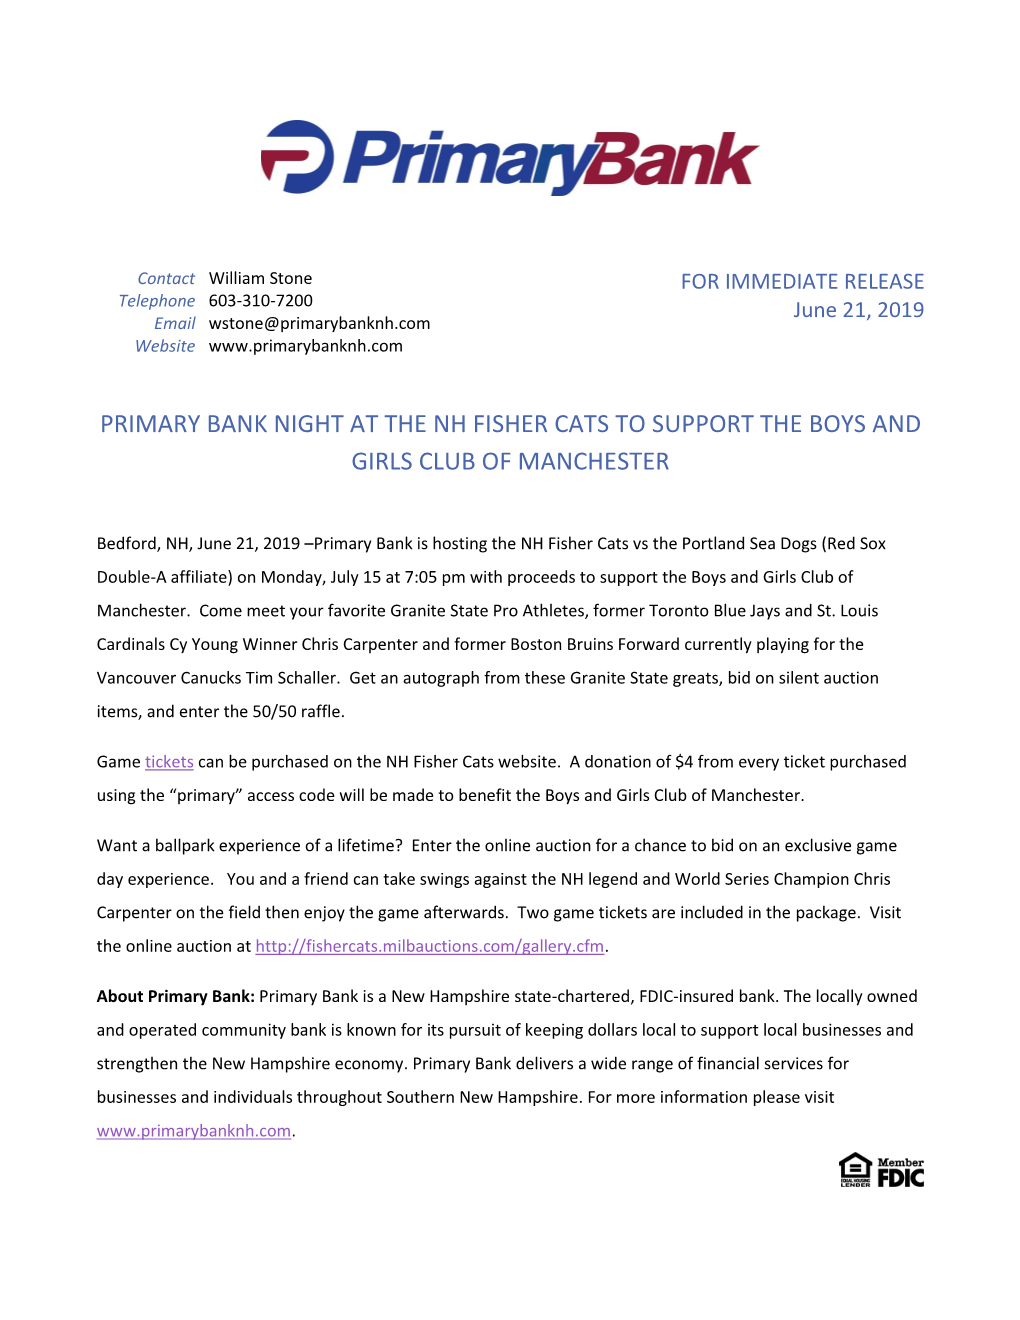 Primary Bank Night at the Fisher Cats on July 15